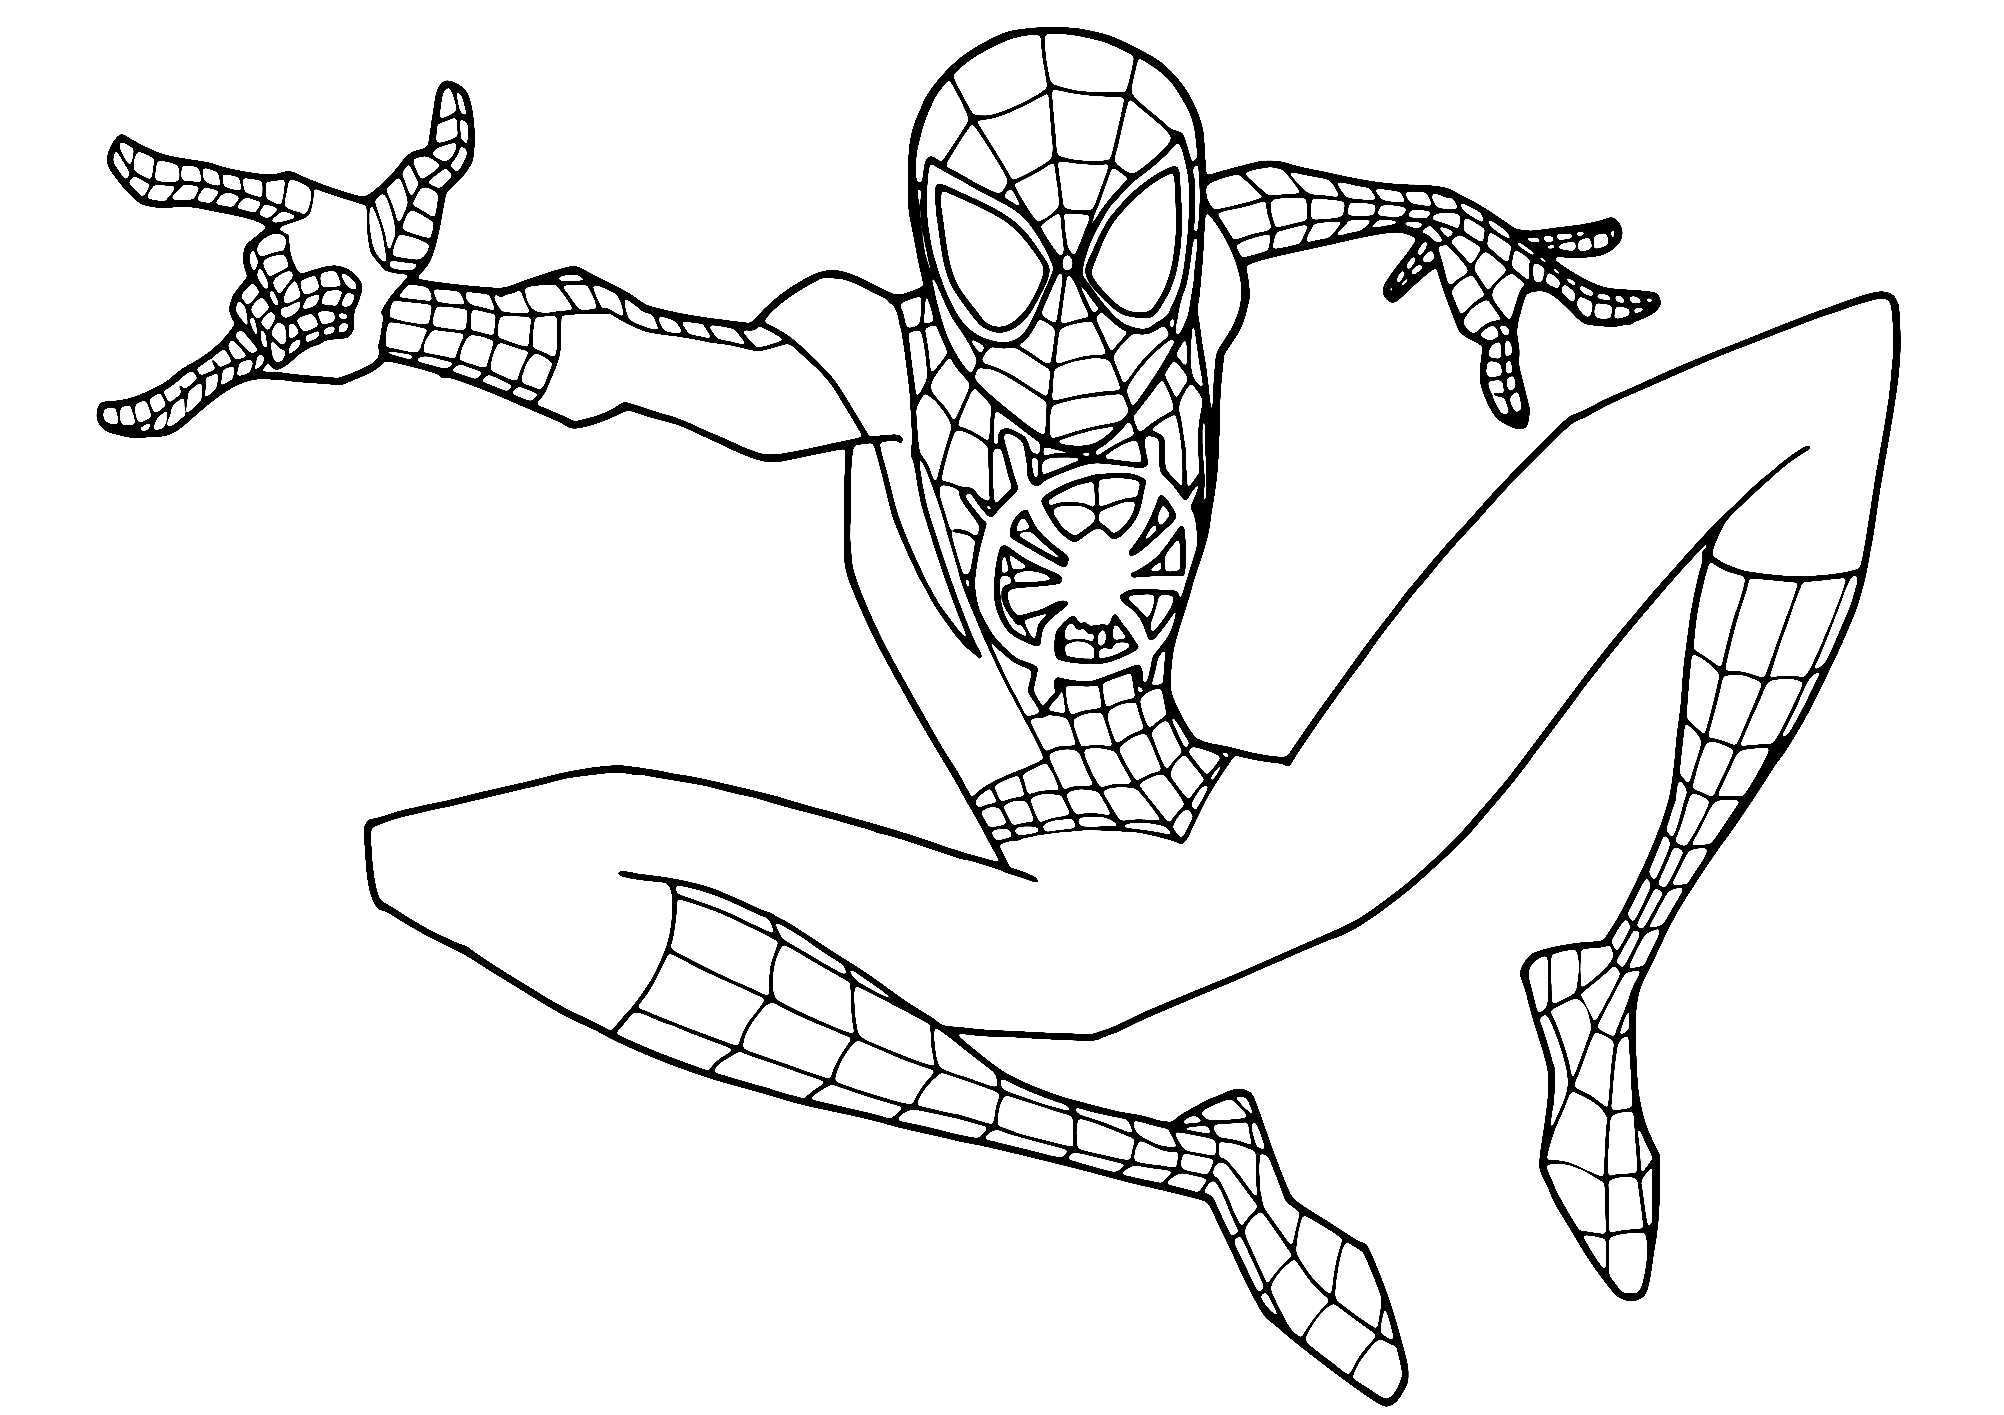 Spiderman Homecoming Cute Spiderman Coloring Page.